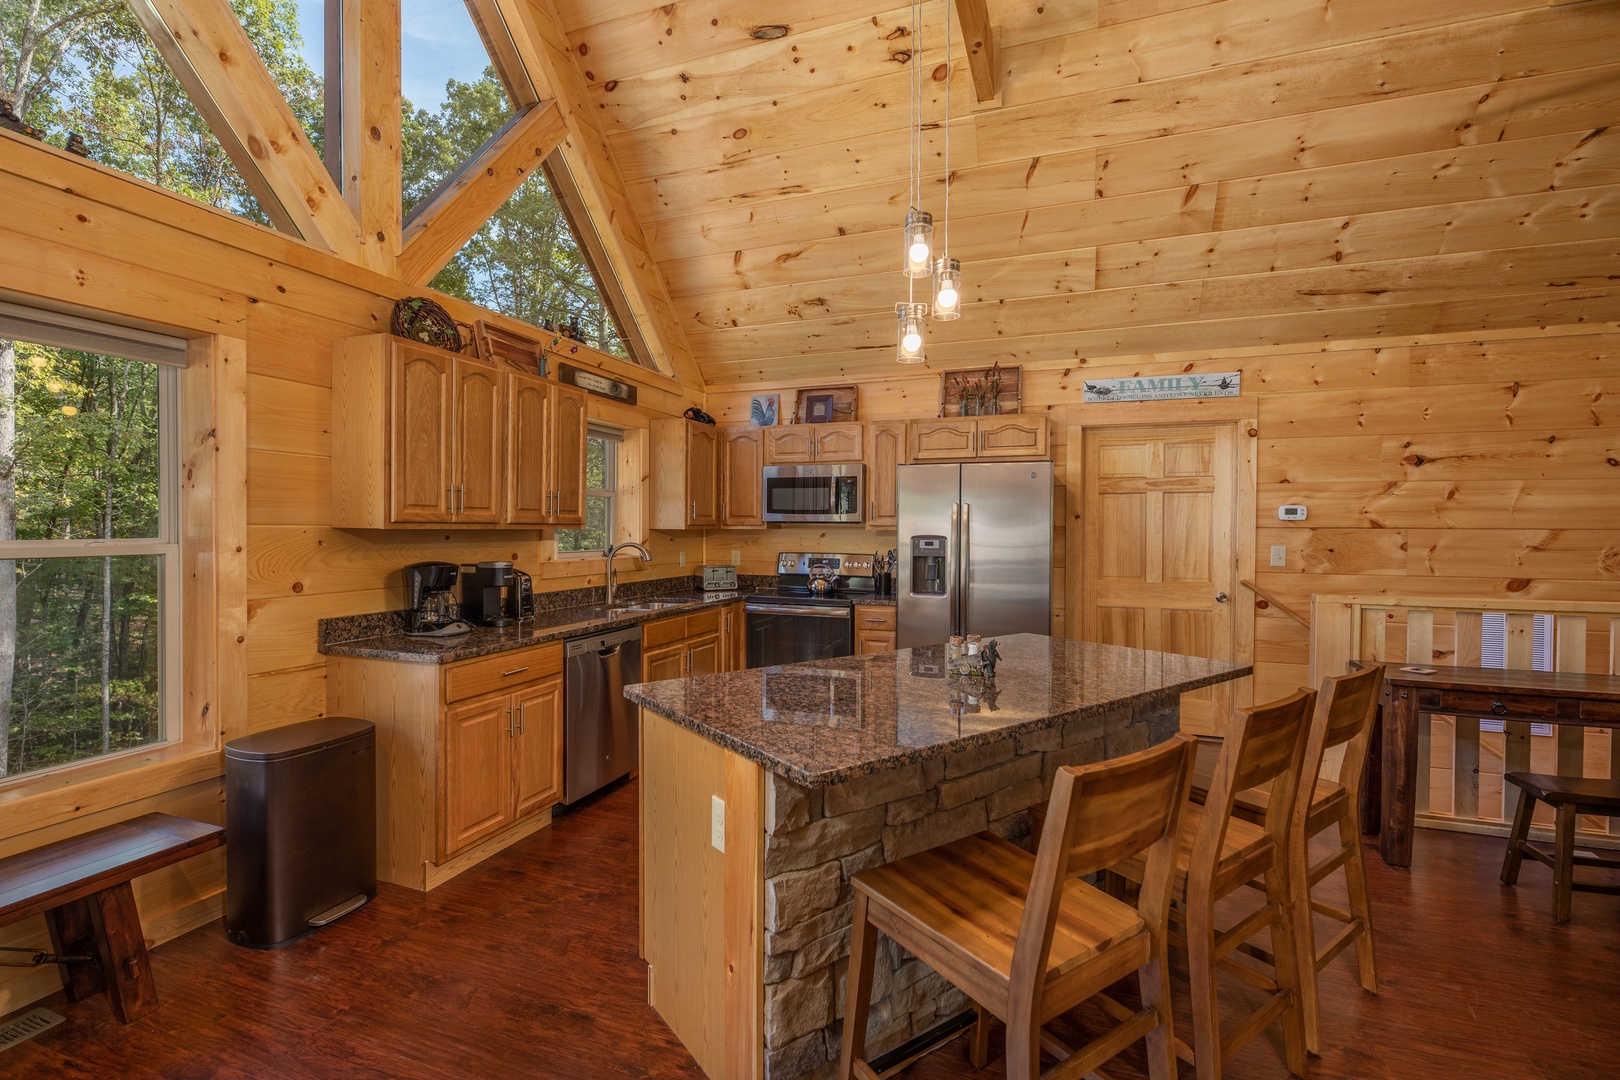 Breakfast bar, dining space, and kitchen at Gar Bear's Hideaway, a 3 bedroom cabin rental located in Pigeon Forge